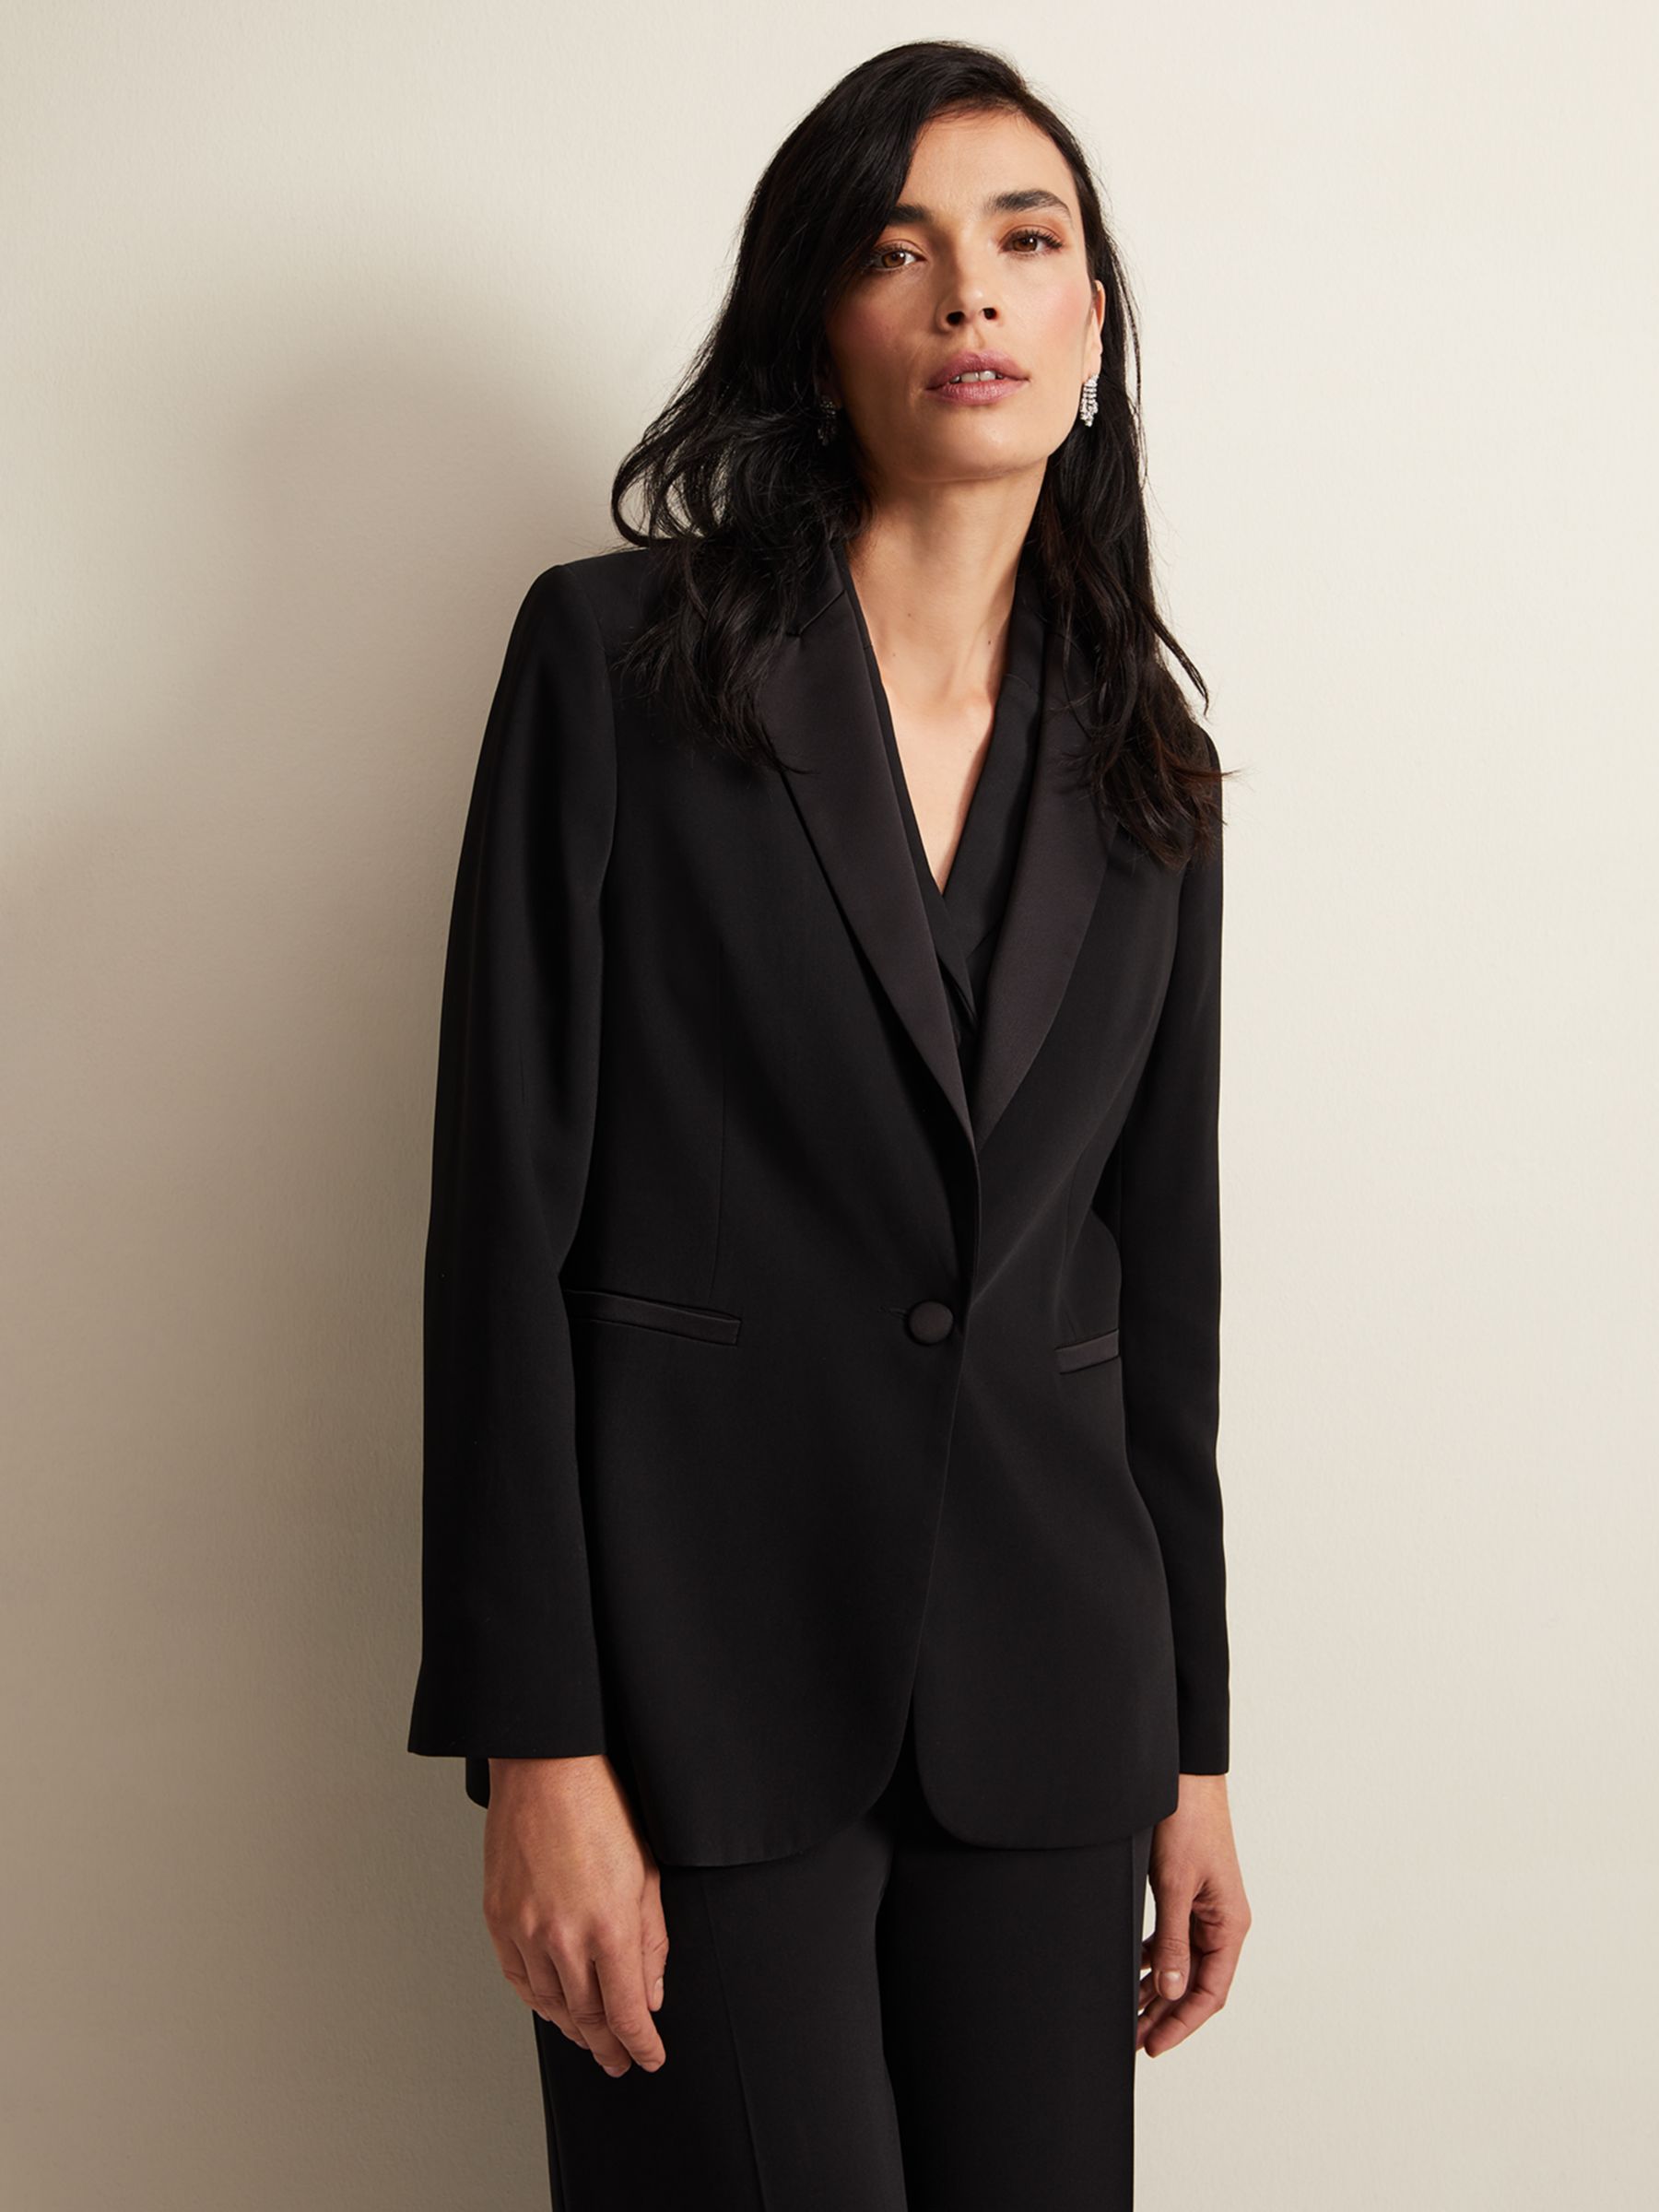 Women's Suits & Trousers, Co-ord Sets & Workwear, Phase Eight